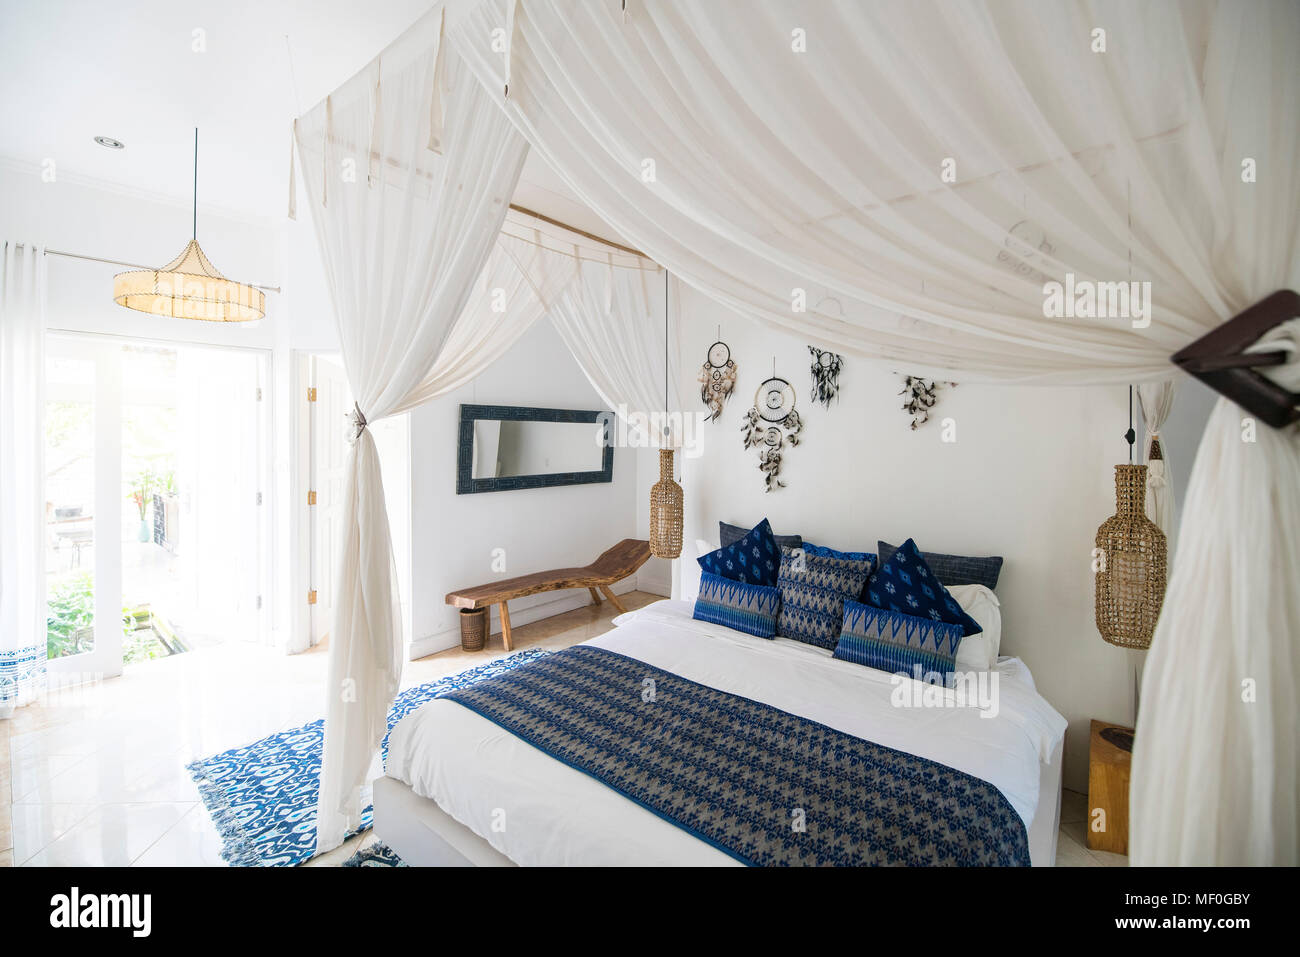 Cozy airy bedroom with blue pillows Stock Photo